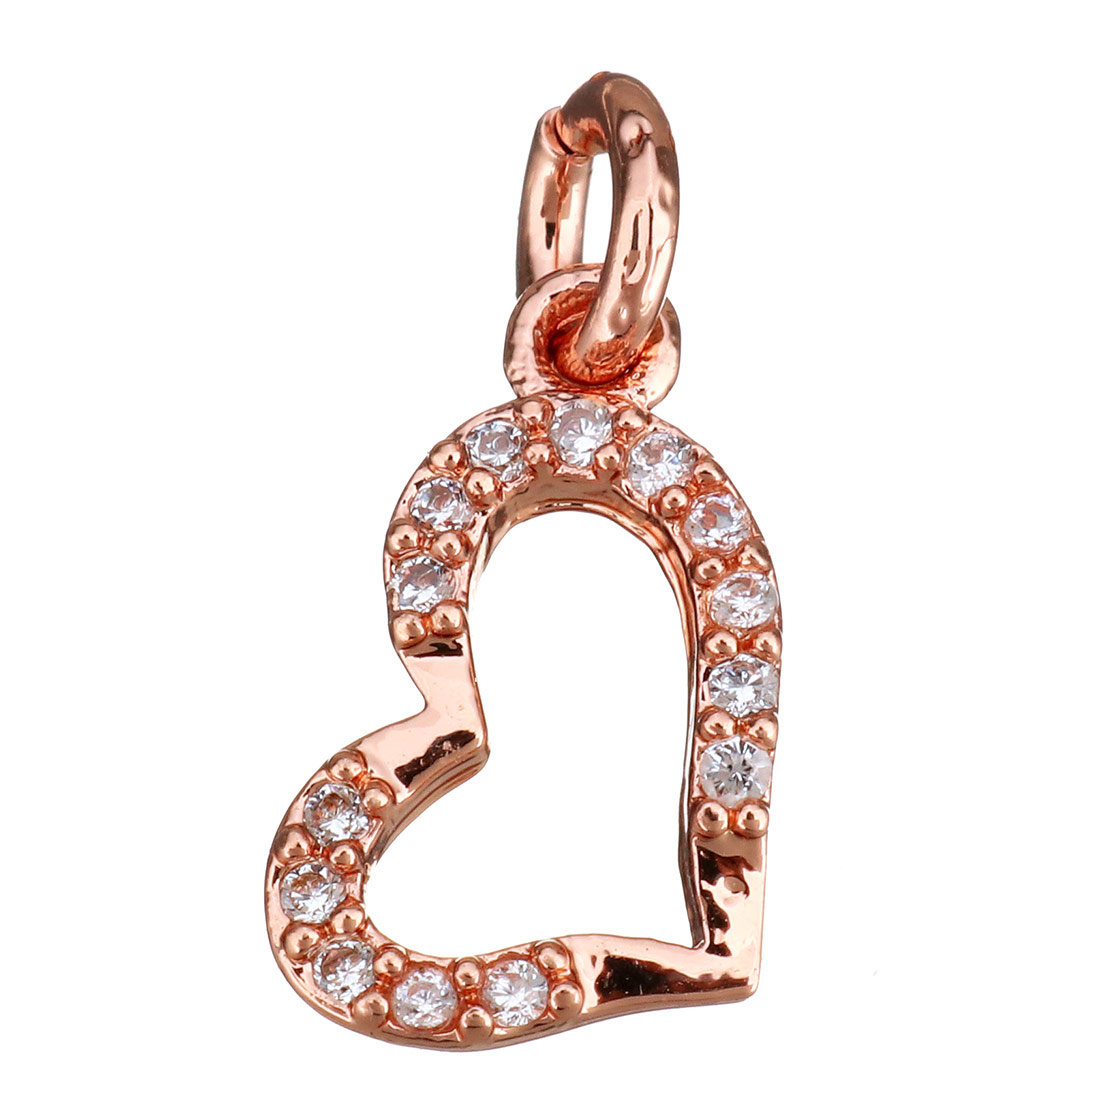 4:real rose gold plated